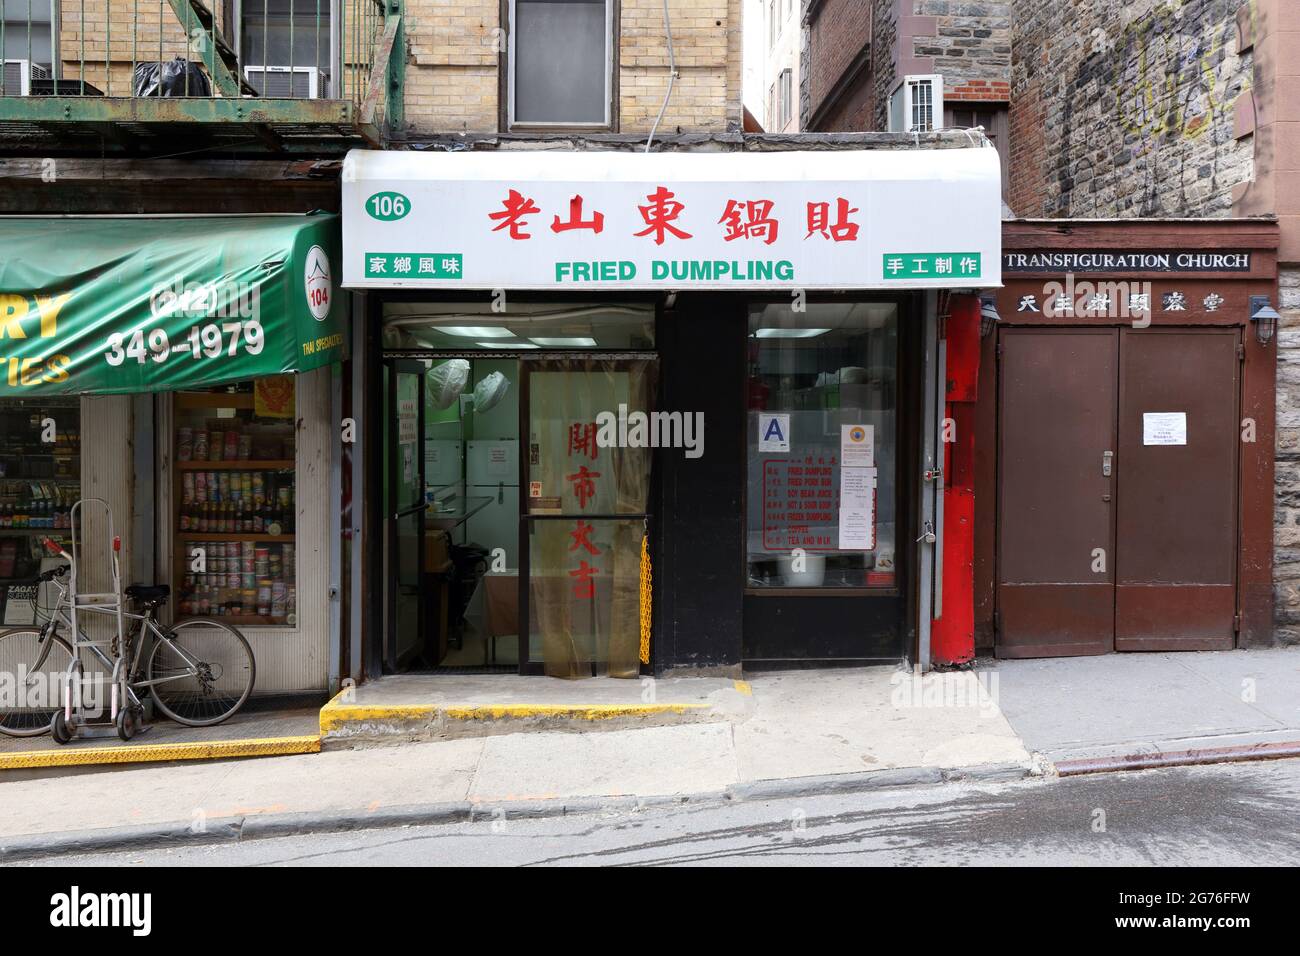 Fried Dumpling, 106 Mosco St, New York, NYC storefront photo of a fried dumplings shop in Manhattan Chinatown. Stock Photo